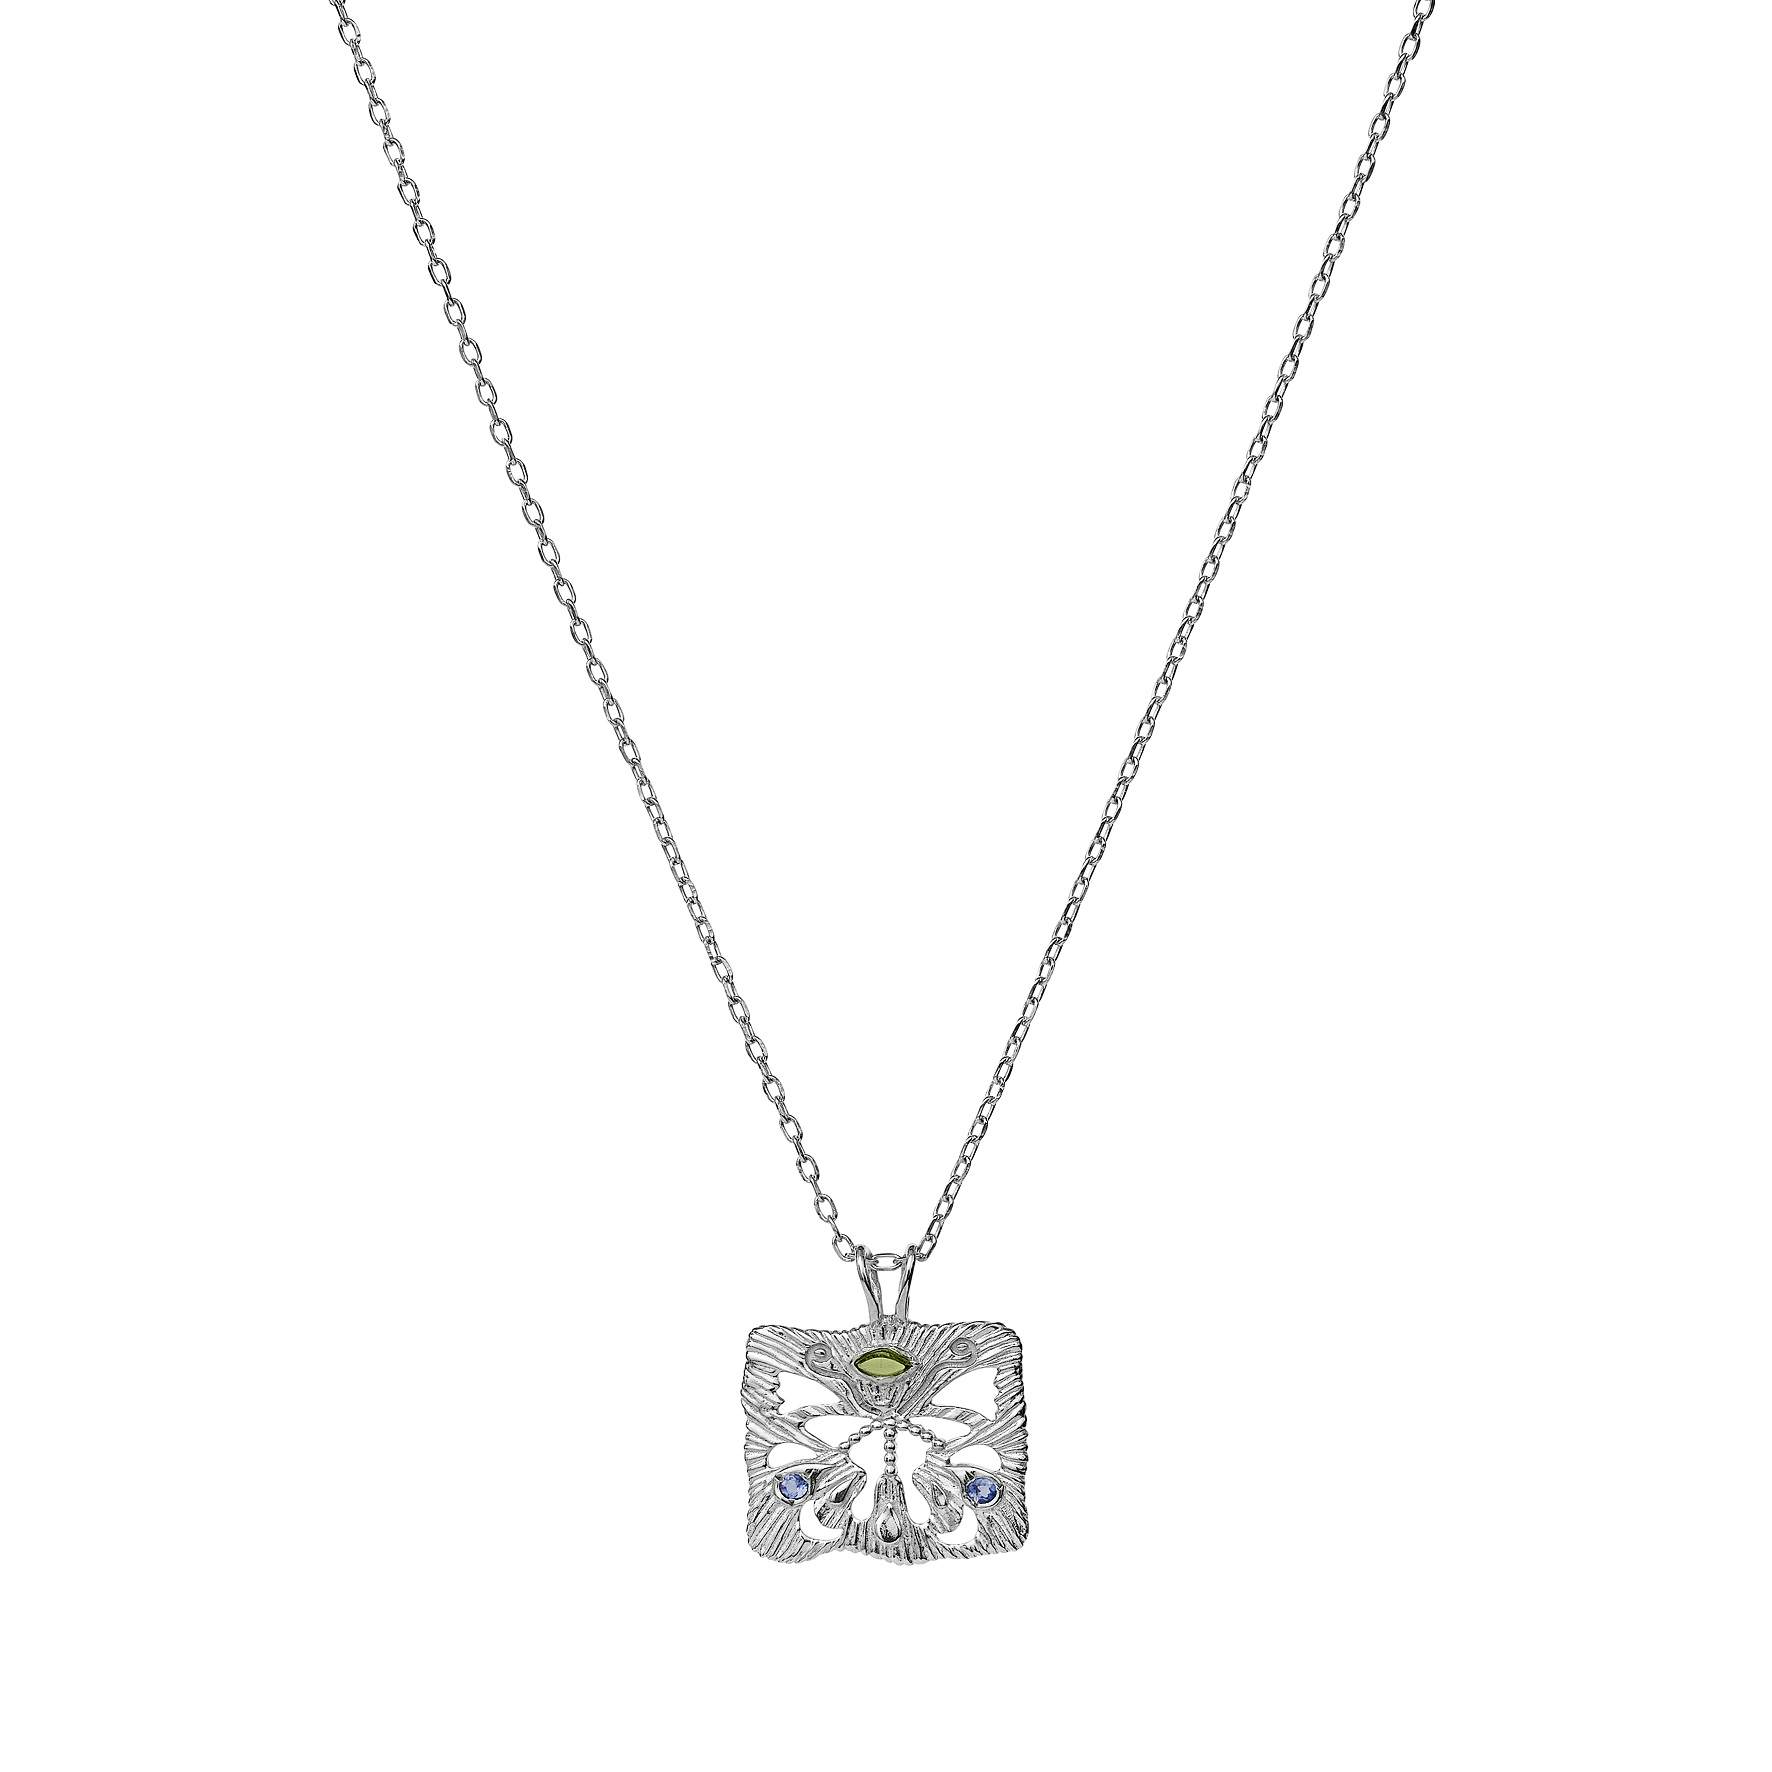 Annabella Necklace from Maanesten in Silver Sterling 925